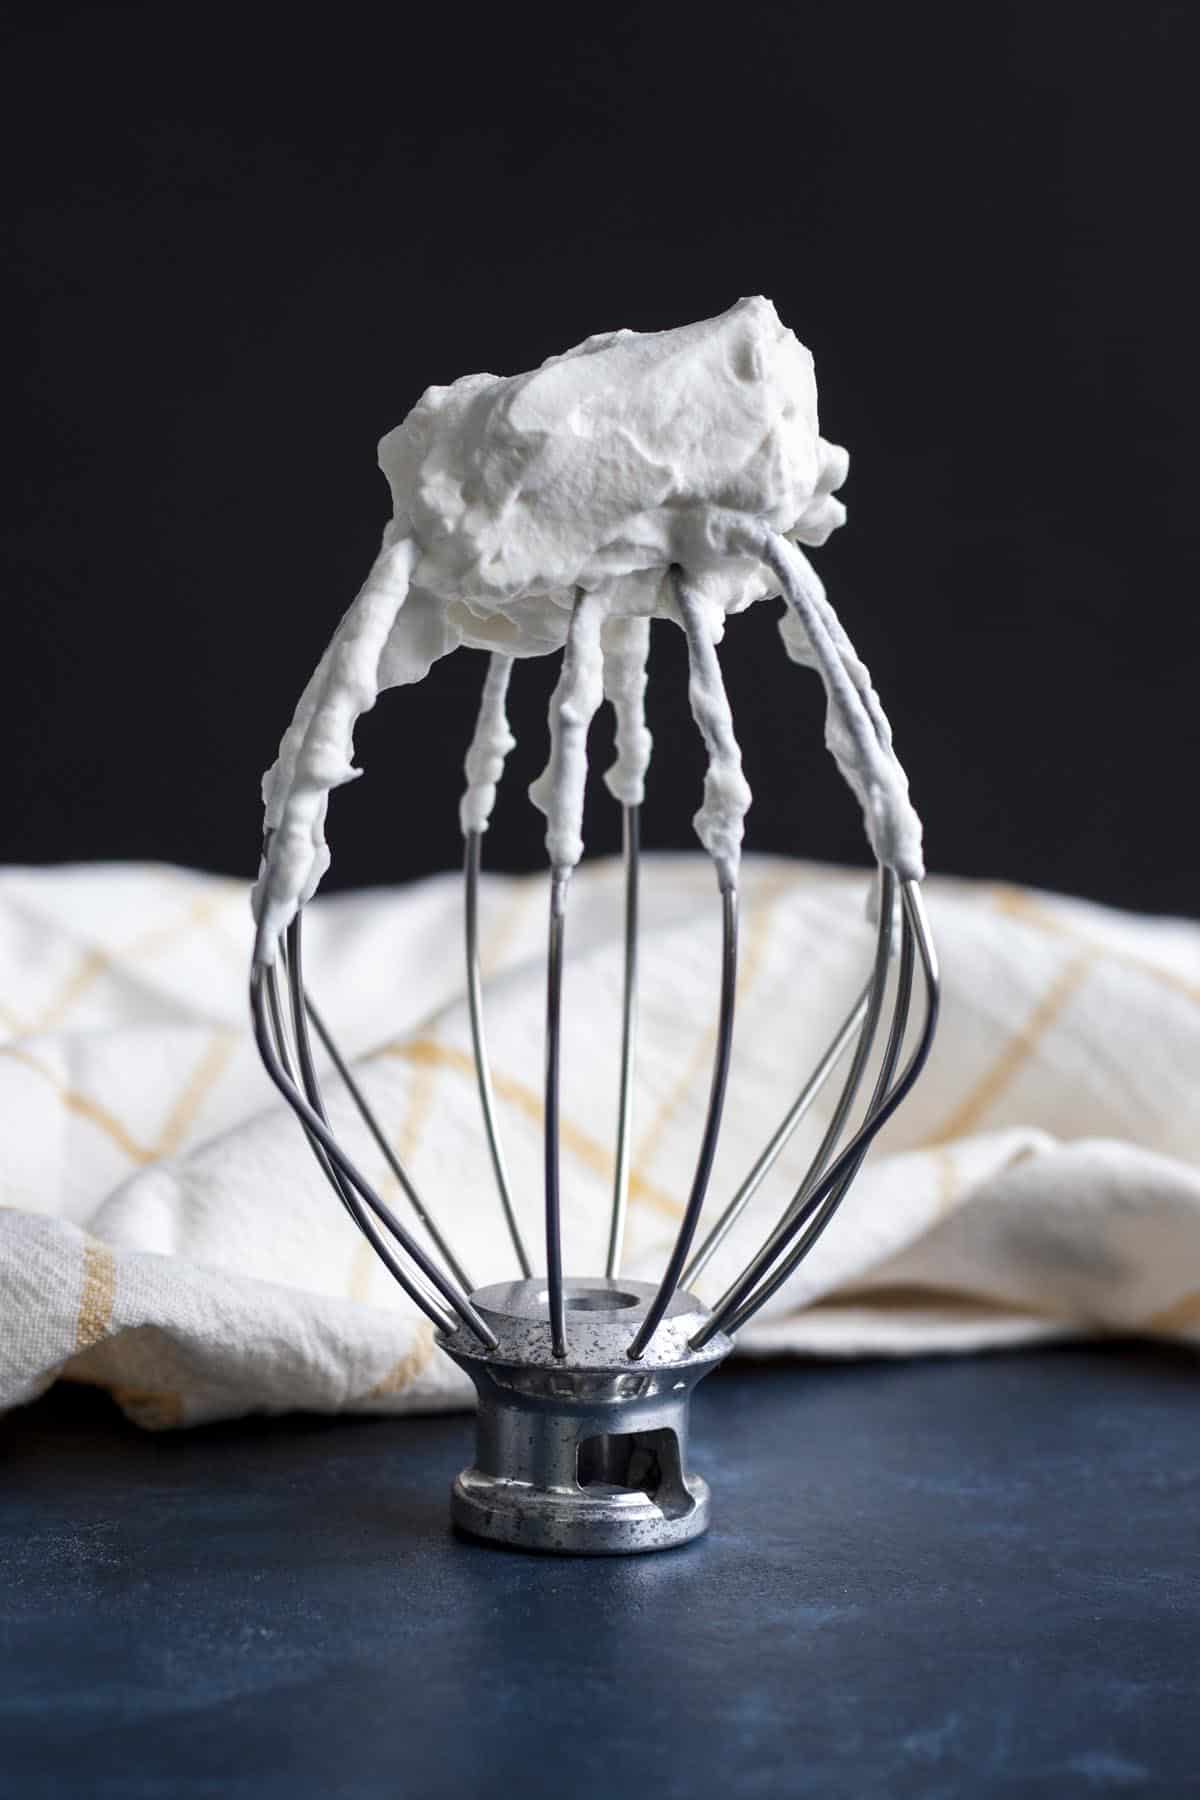 Homemade whipped cream whipped until stiff peaks, on a wire whip.